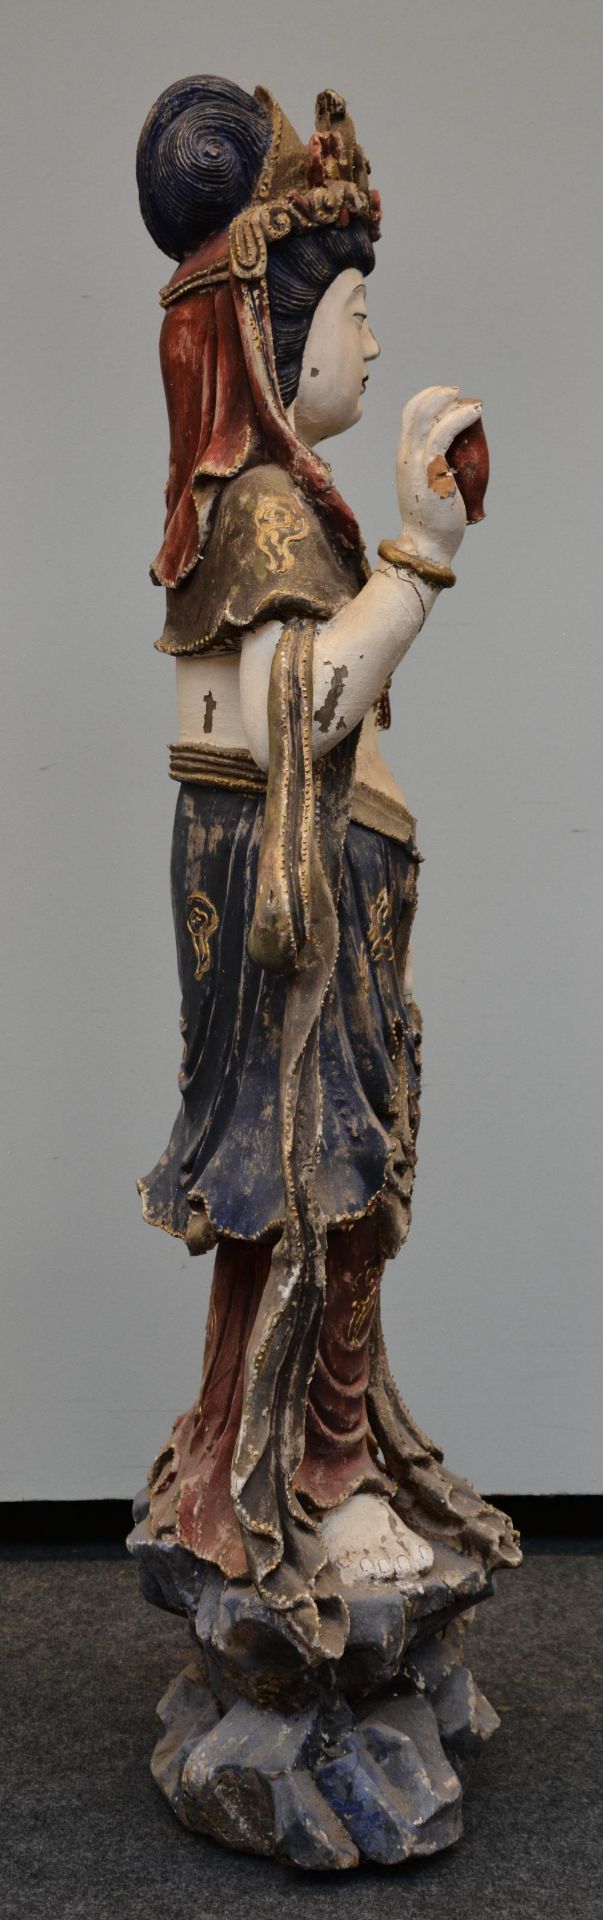 An exceptional Guanyin sculpture in polychrome wood, possibly Tibet, 18thC, H 141 cm (damage to - Image 9 of 11